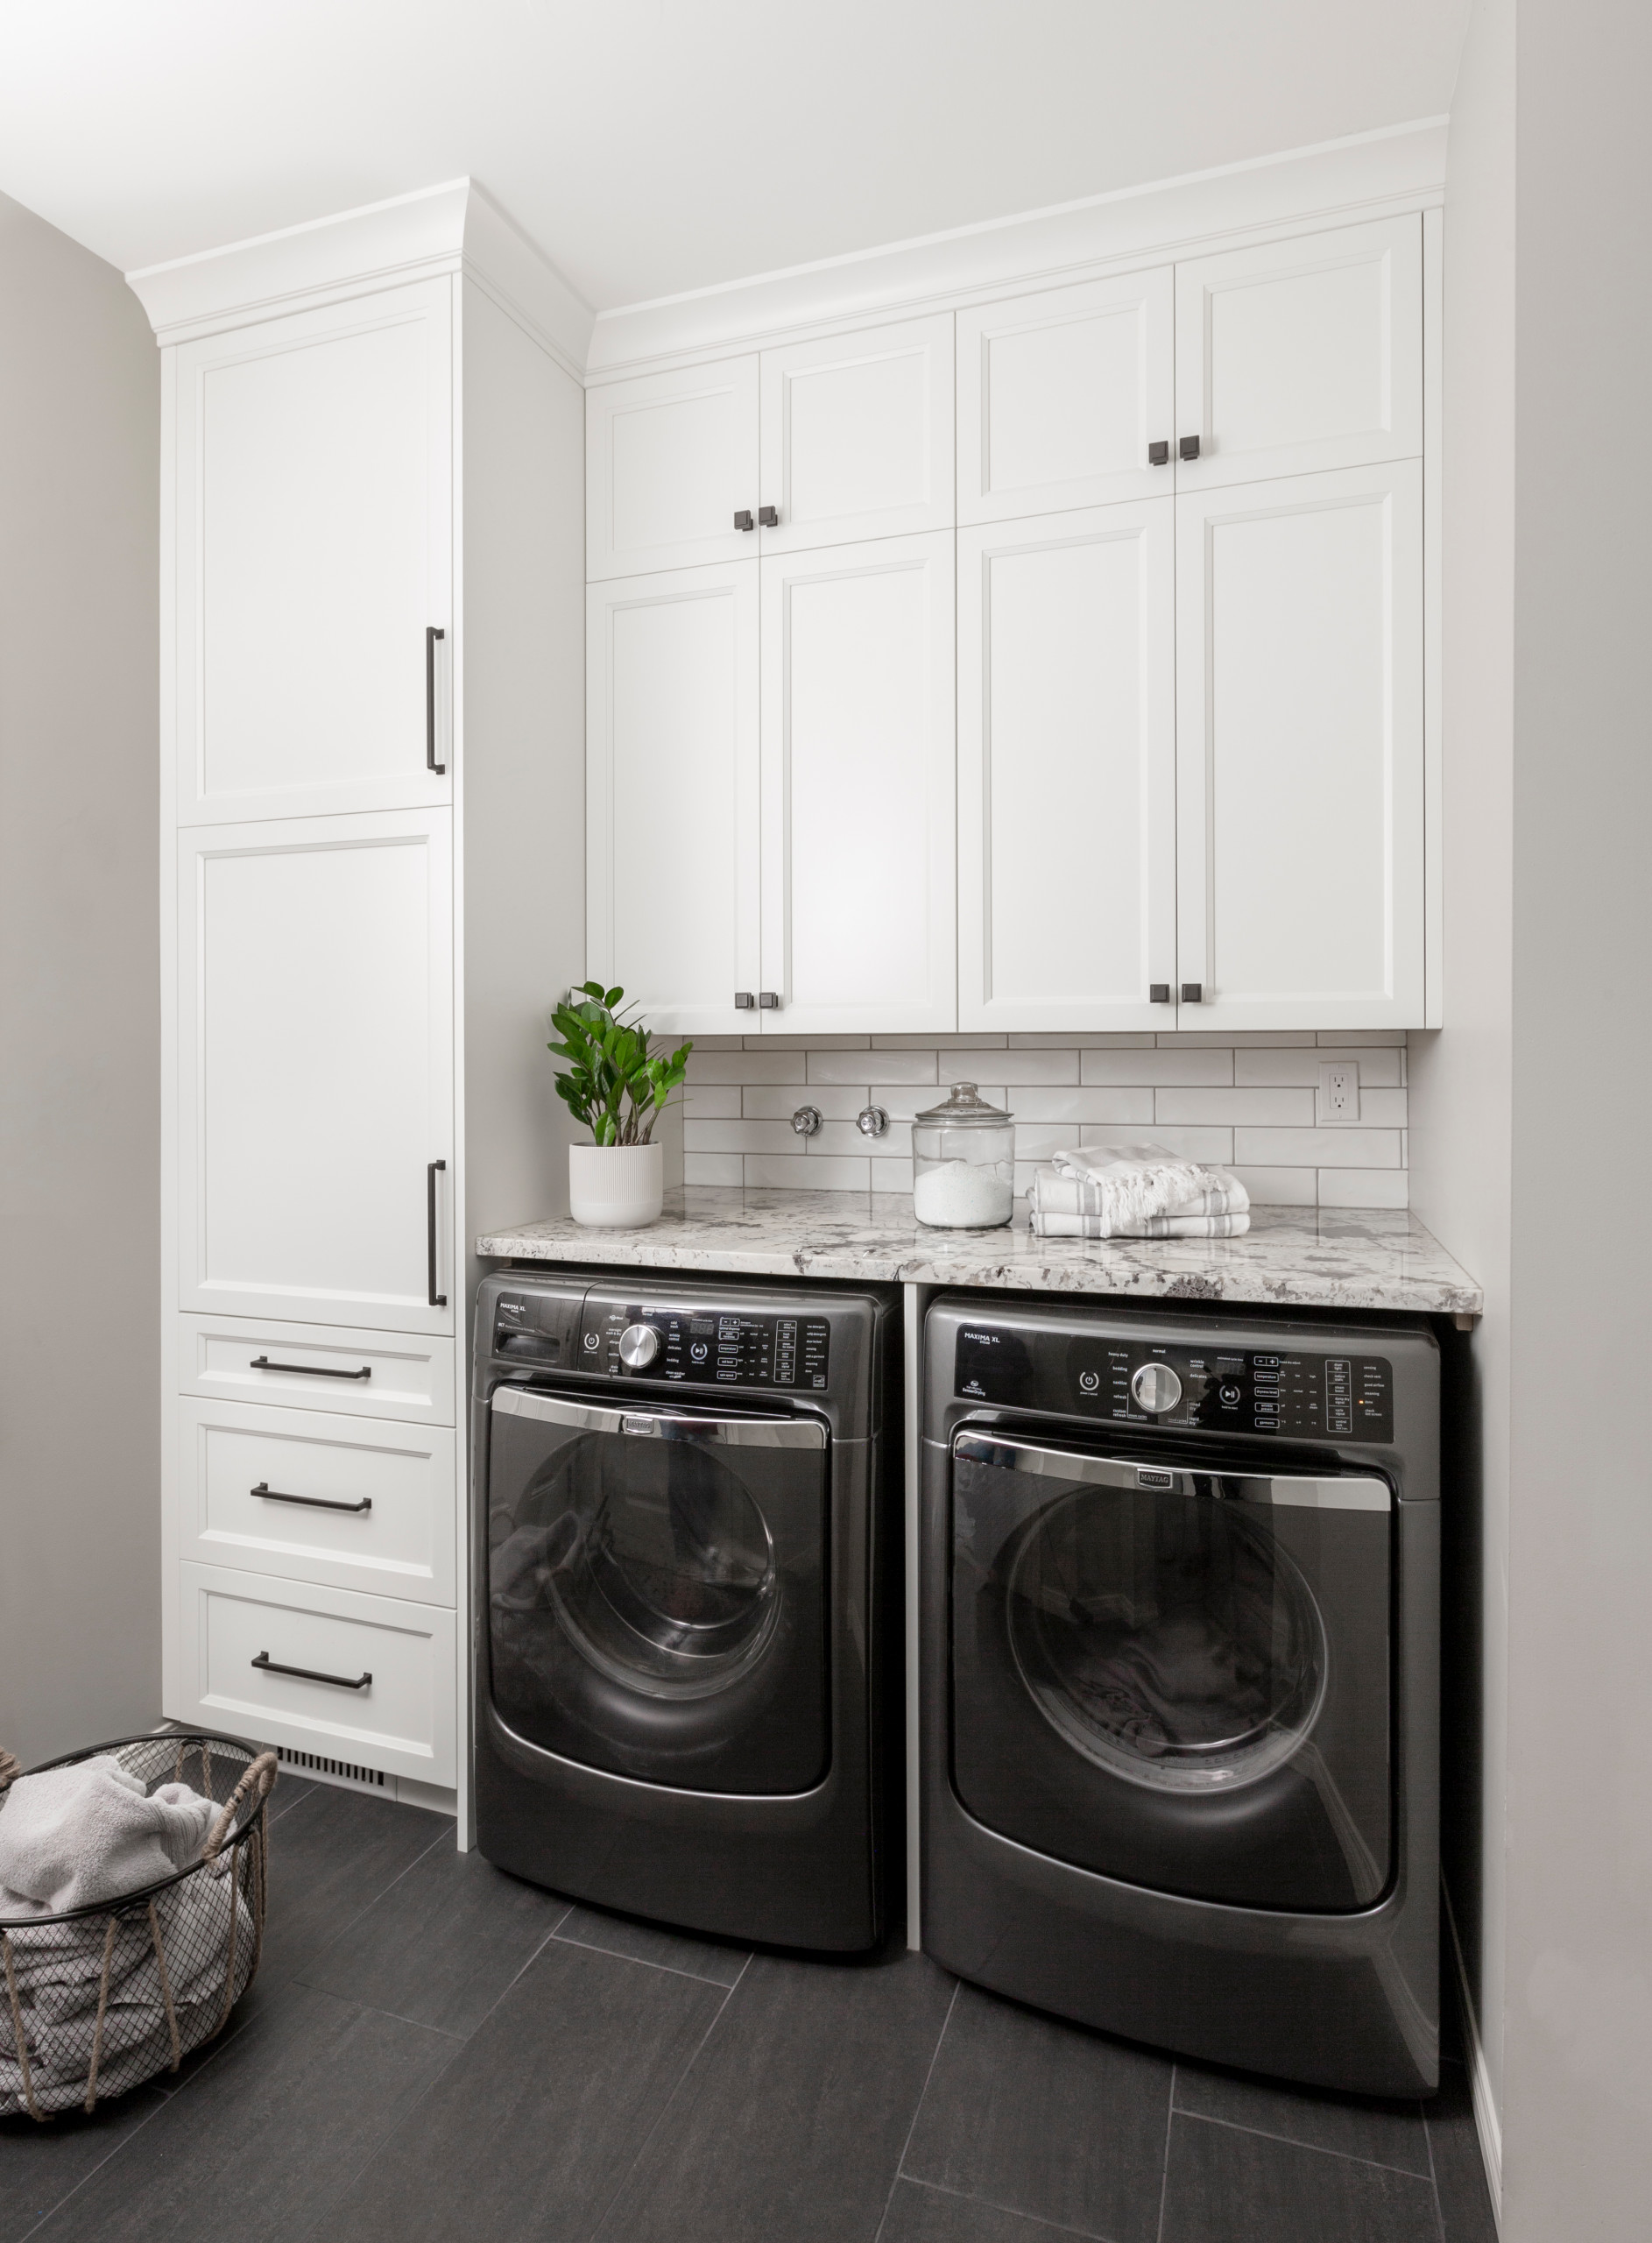 75 Beautiful Laundry Room With White Cabinets Pictures Ideas December